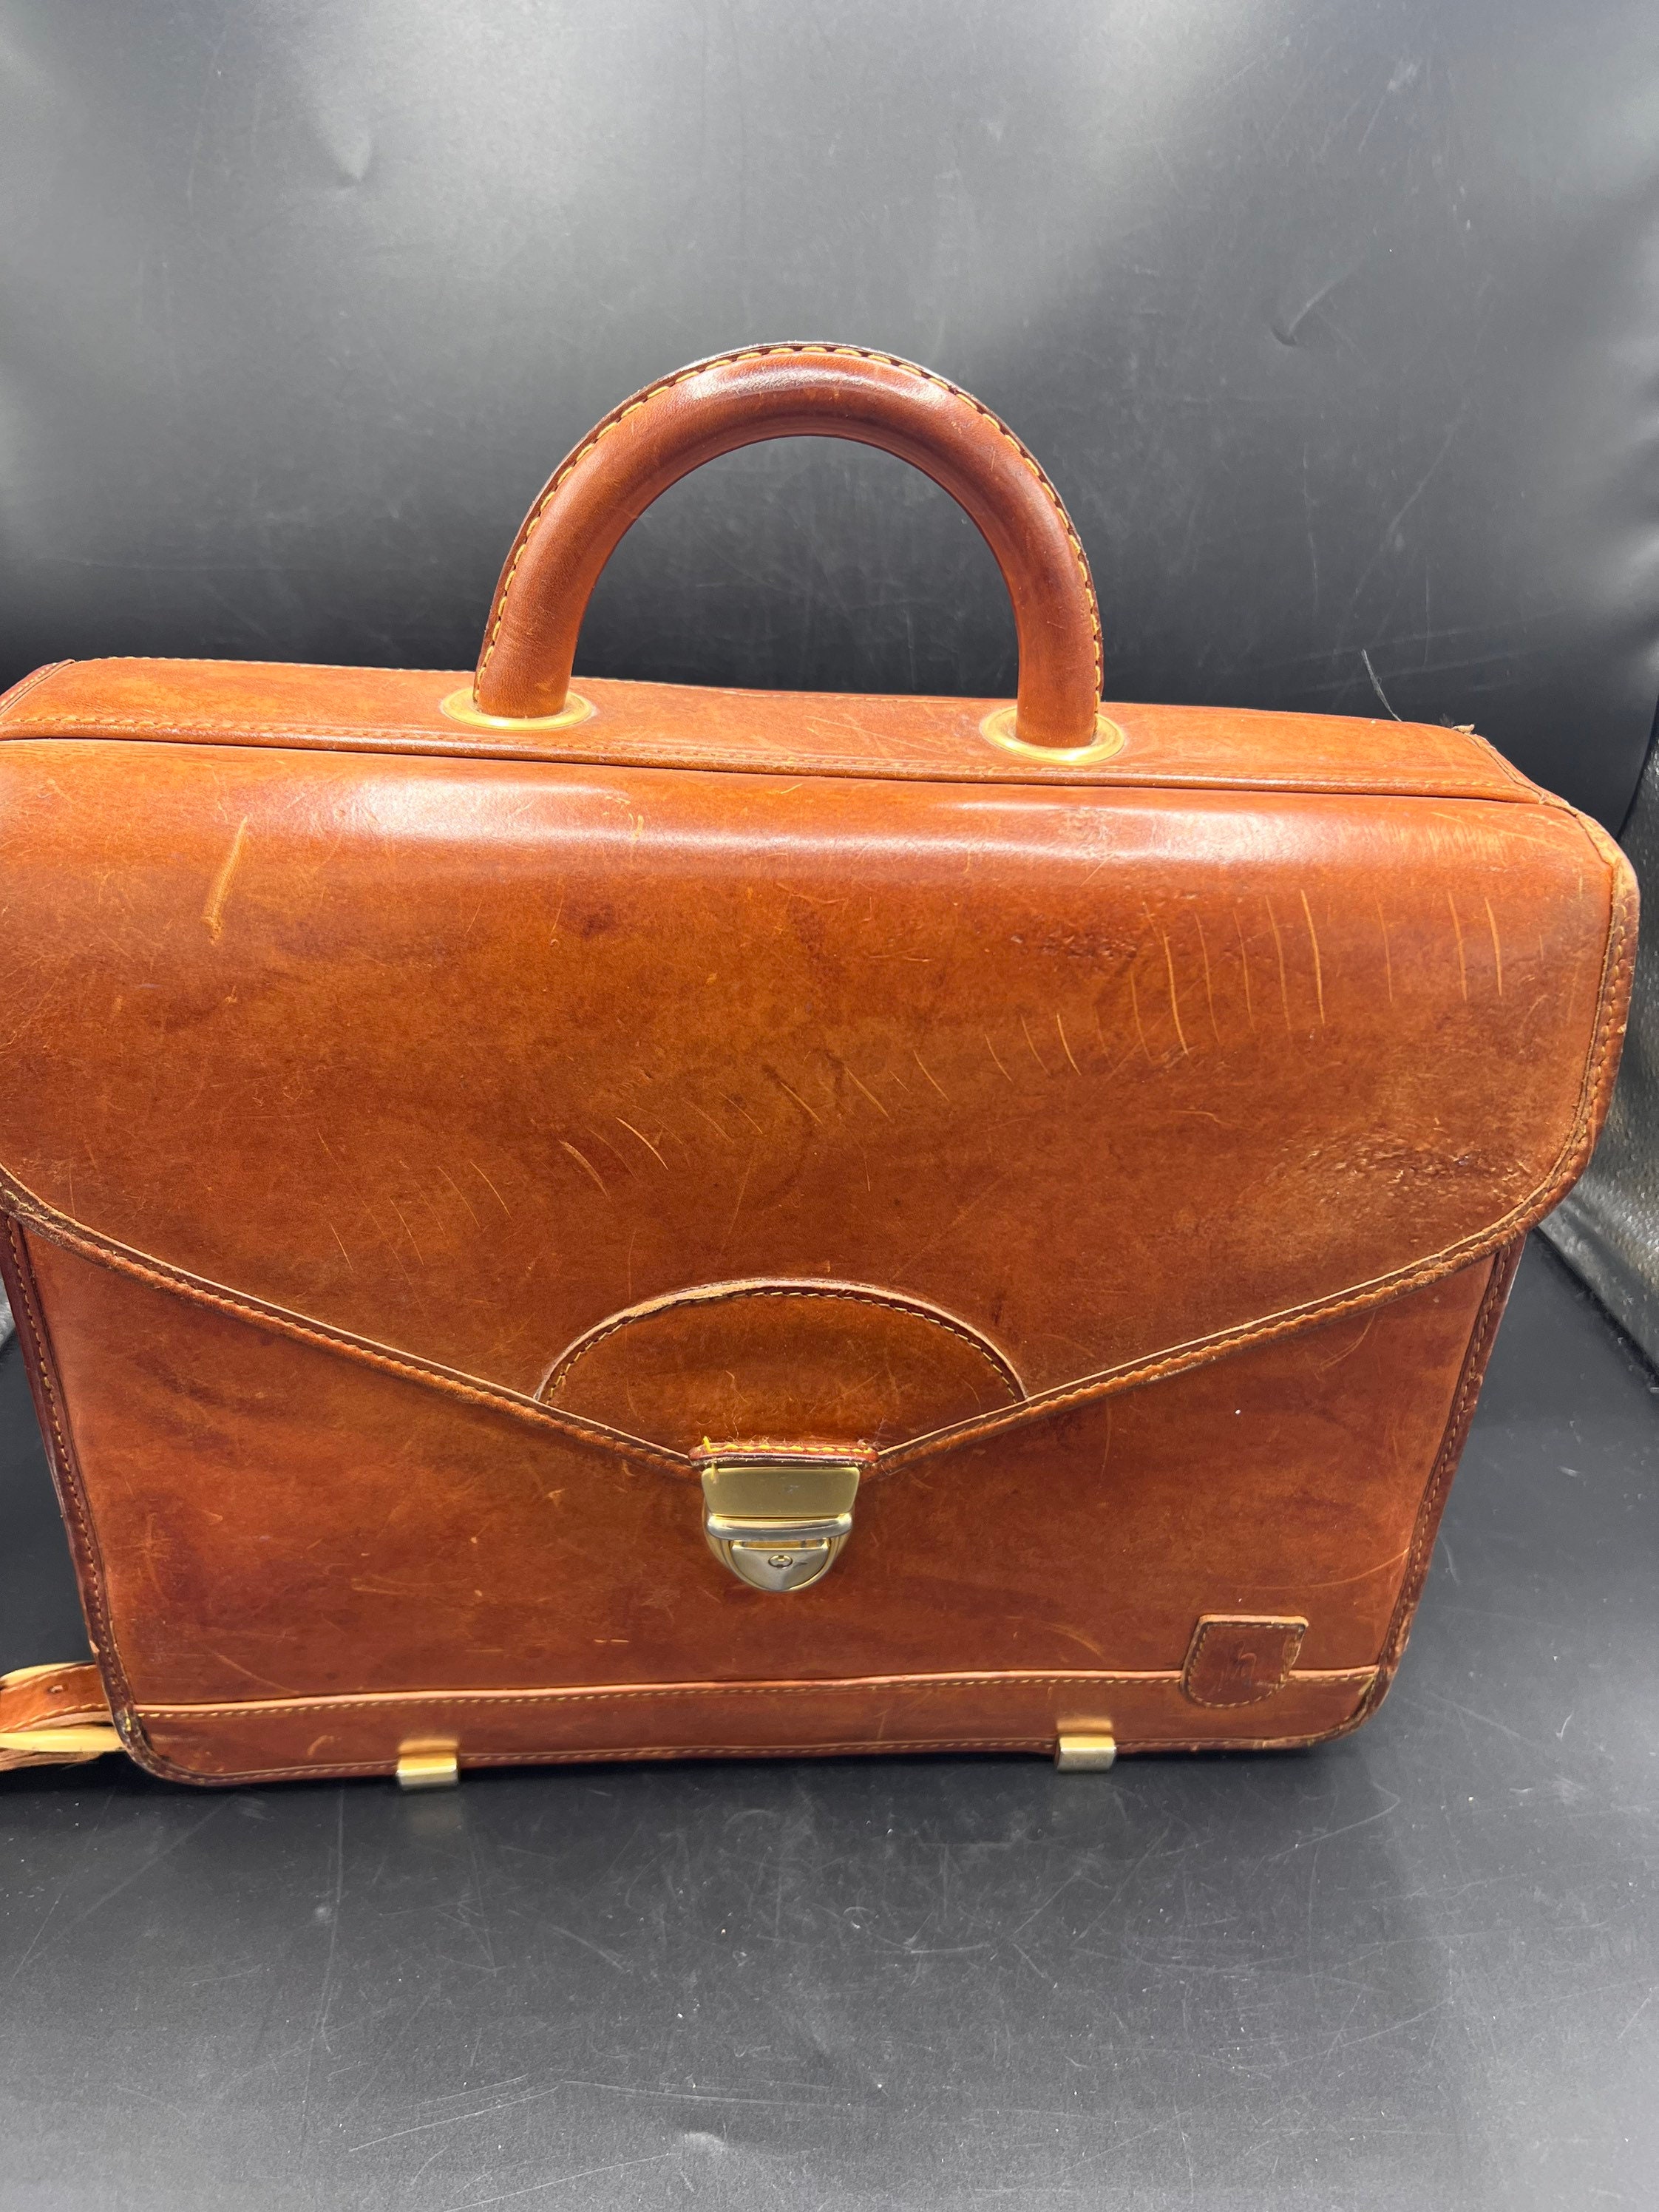 20th Century American Leather Briefcase By Hartmann, c.1920